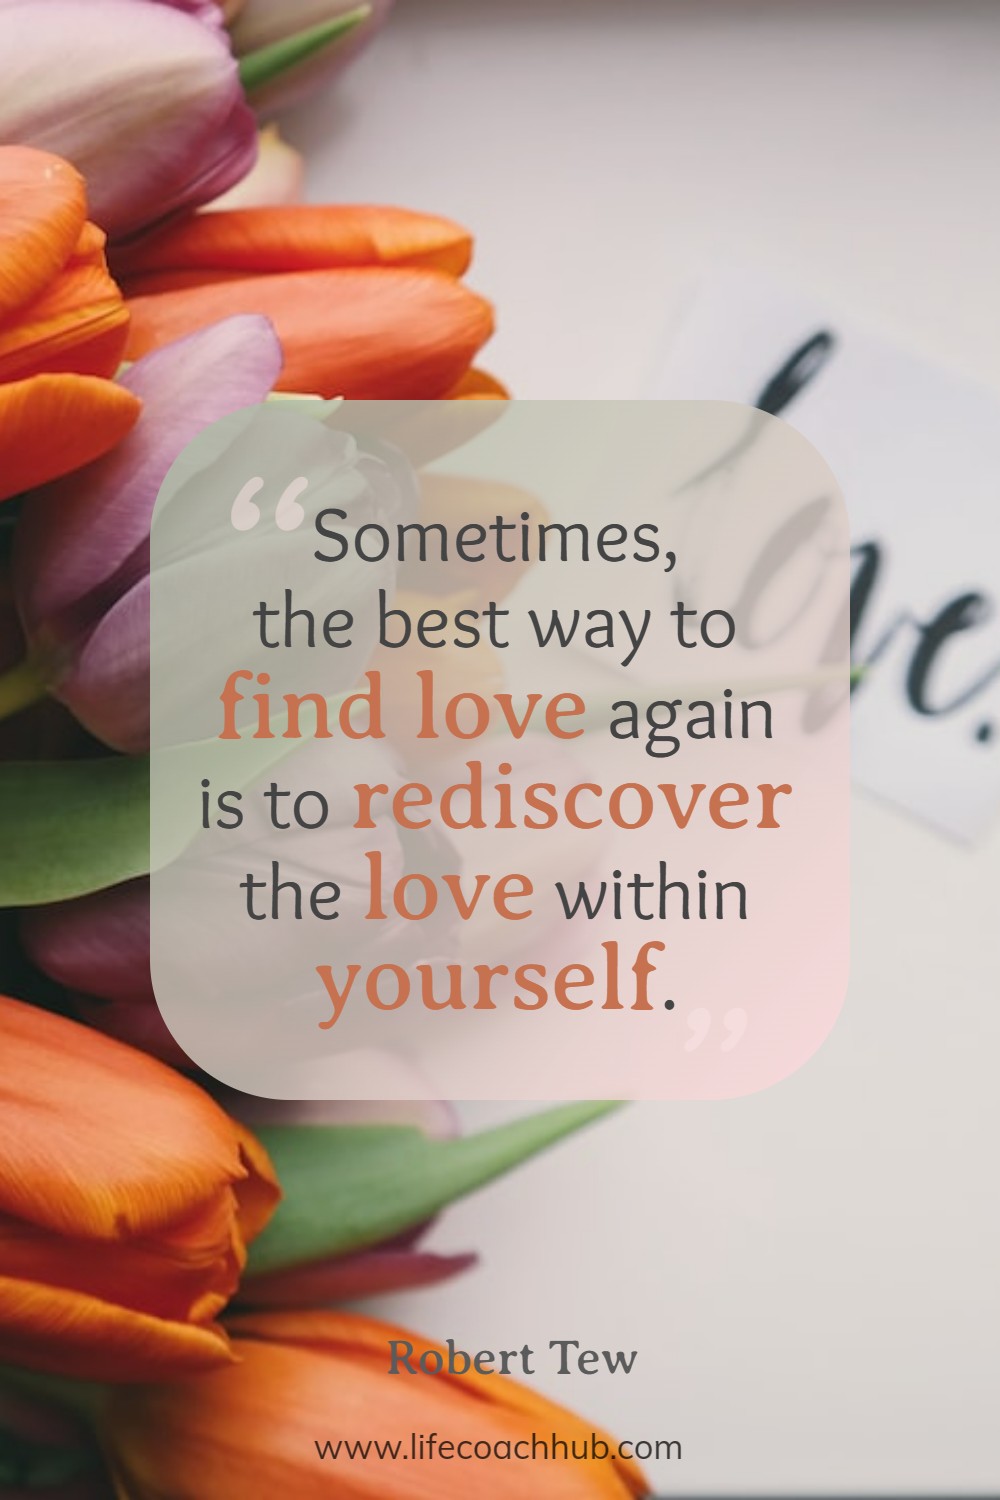 Sometimes, the best way to find love again is to rediscover the love within yourself.	Robert Tew